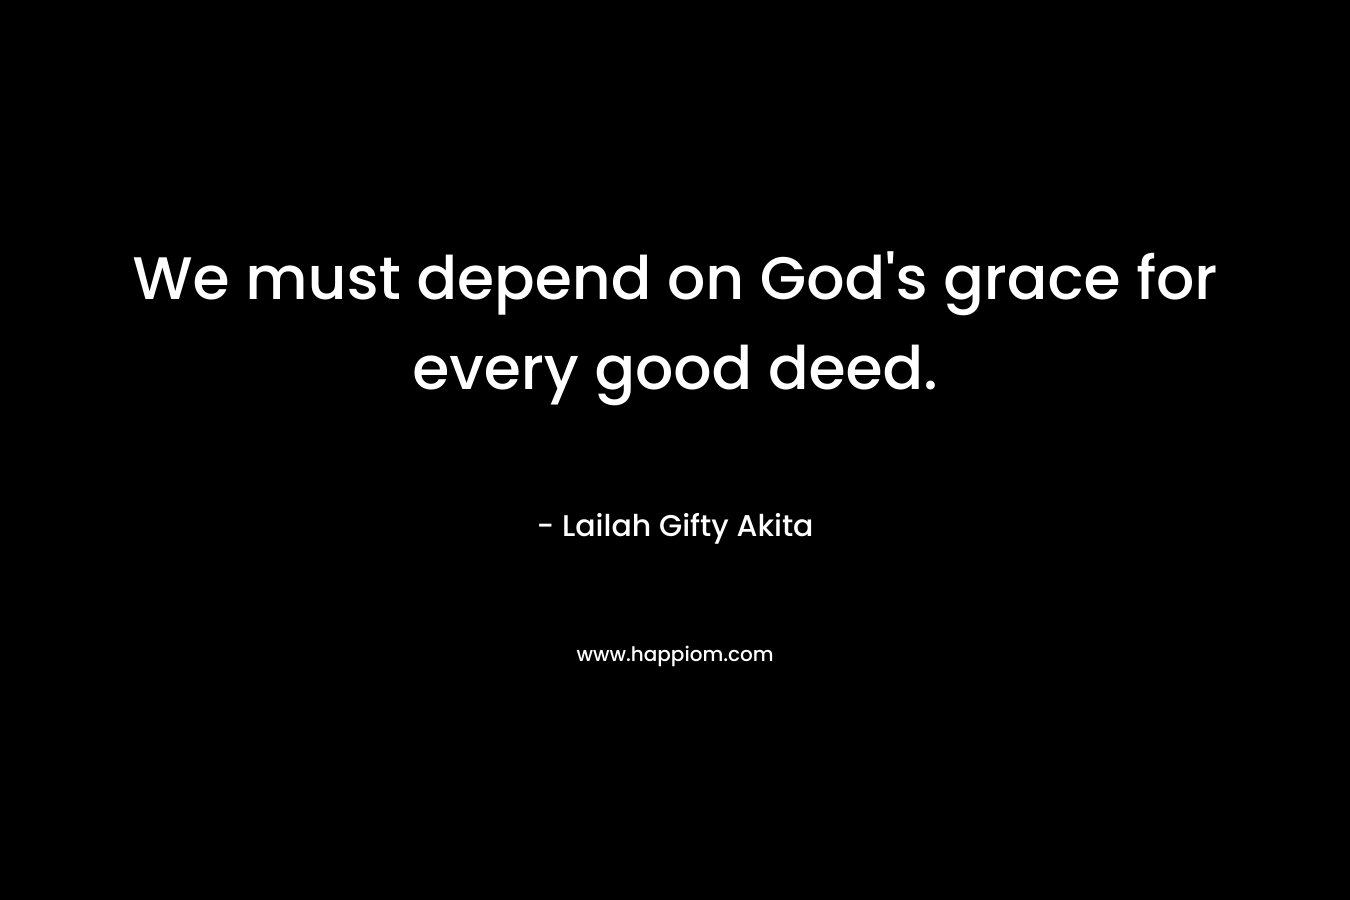 We must depend on God's grace for every good deed.